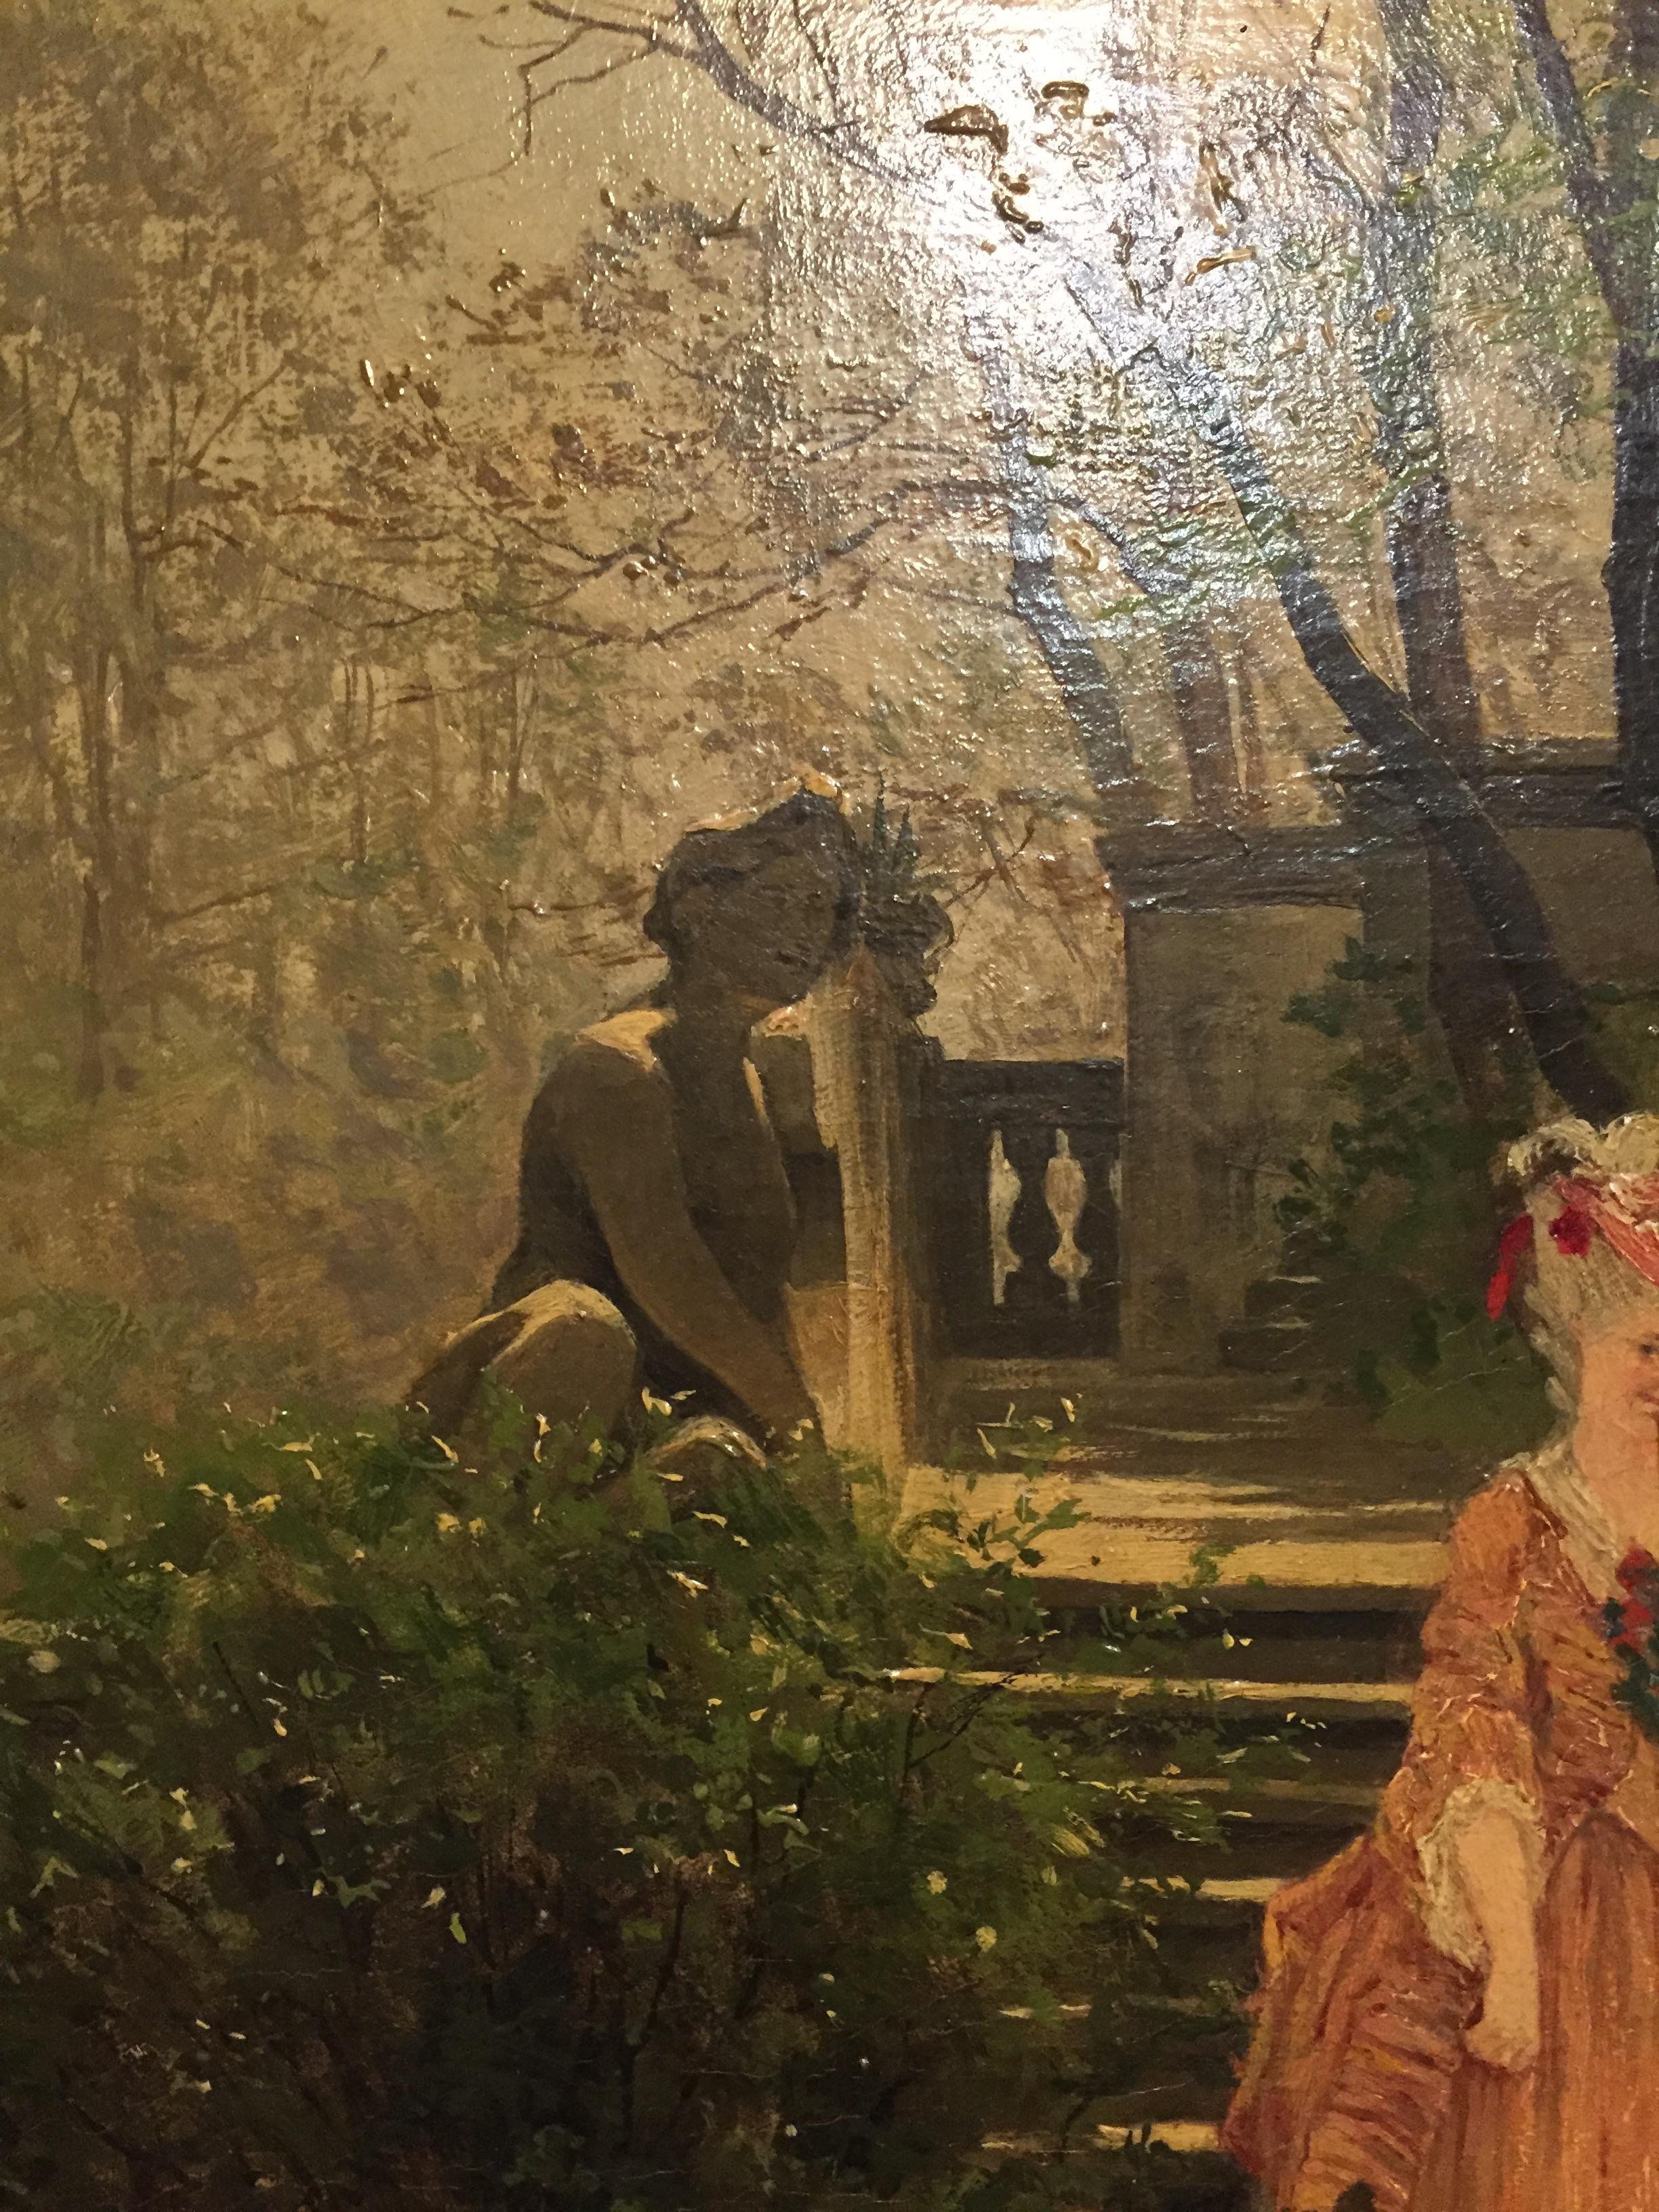 Oil Painting by P. F. Flickel in the Castle Garden 3